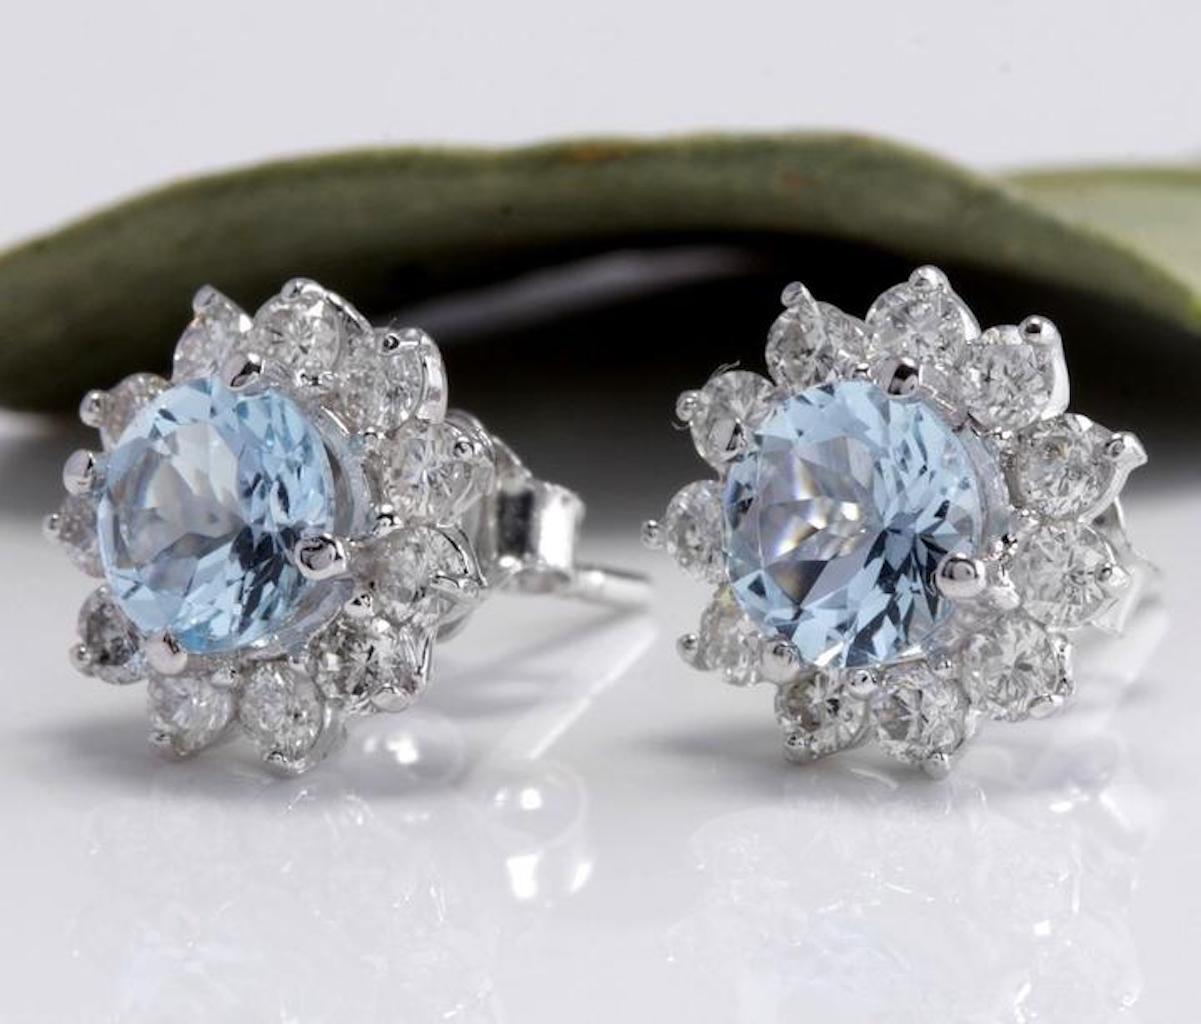 Exquisite 3.25 Carats Natural Aquamarine and Diamond 14K Solid White Gold Stud Earrings

Amazing looking piece!

Total Natural Round Cut White Diamonds Weight: Approx. 1.00 Carat (color G-H / Clarity SI1-SI2)

Total Natural Round Cut Aquamarines